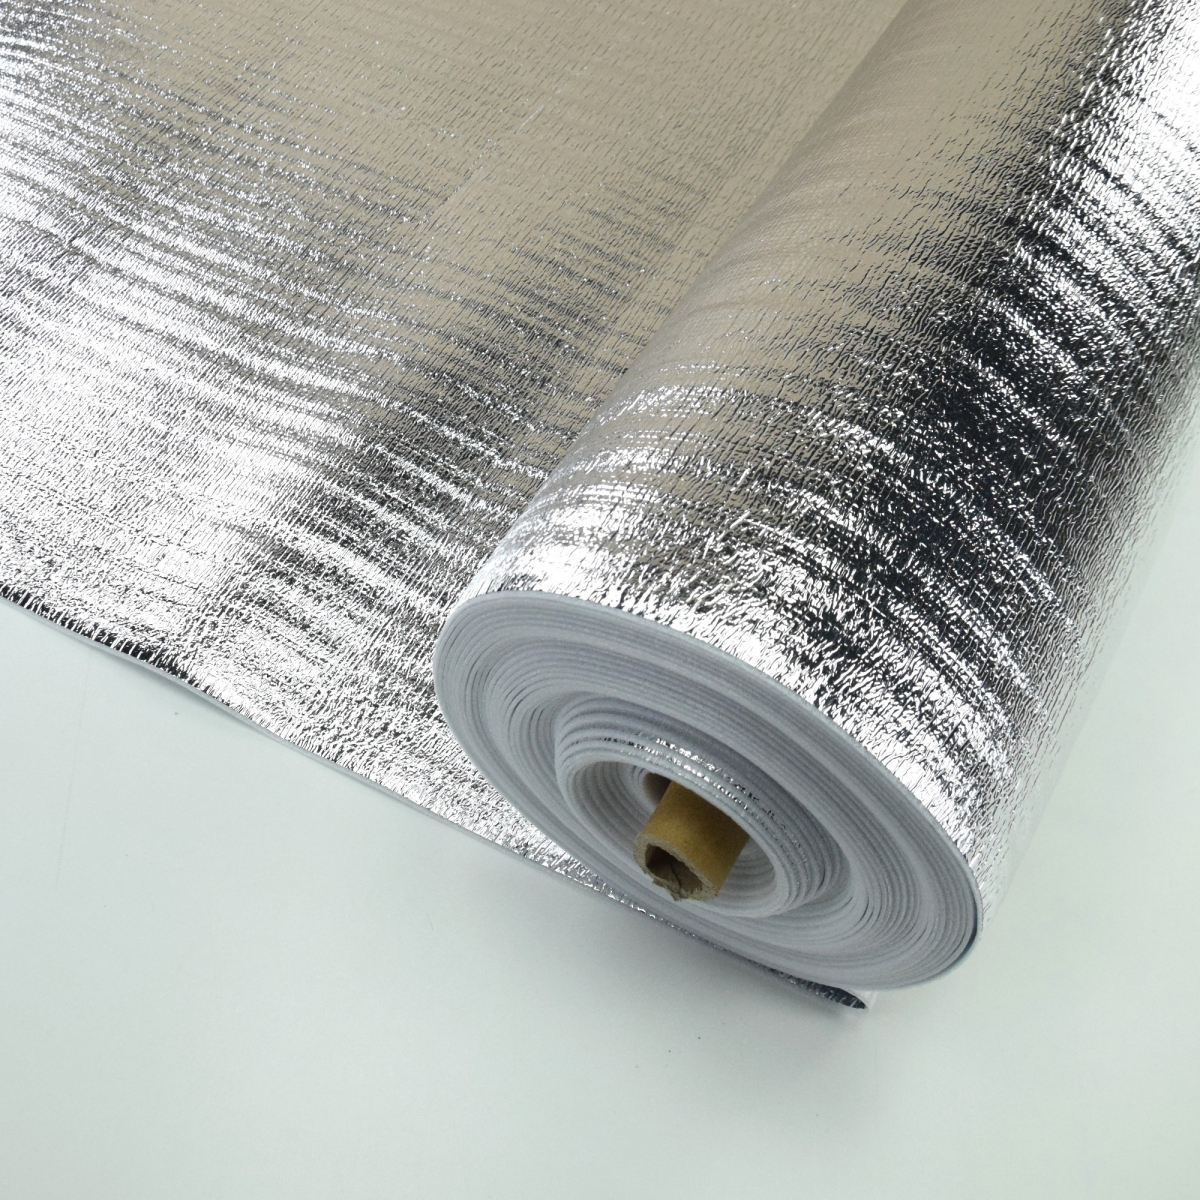 Thermal insulating material, silver